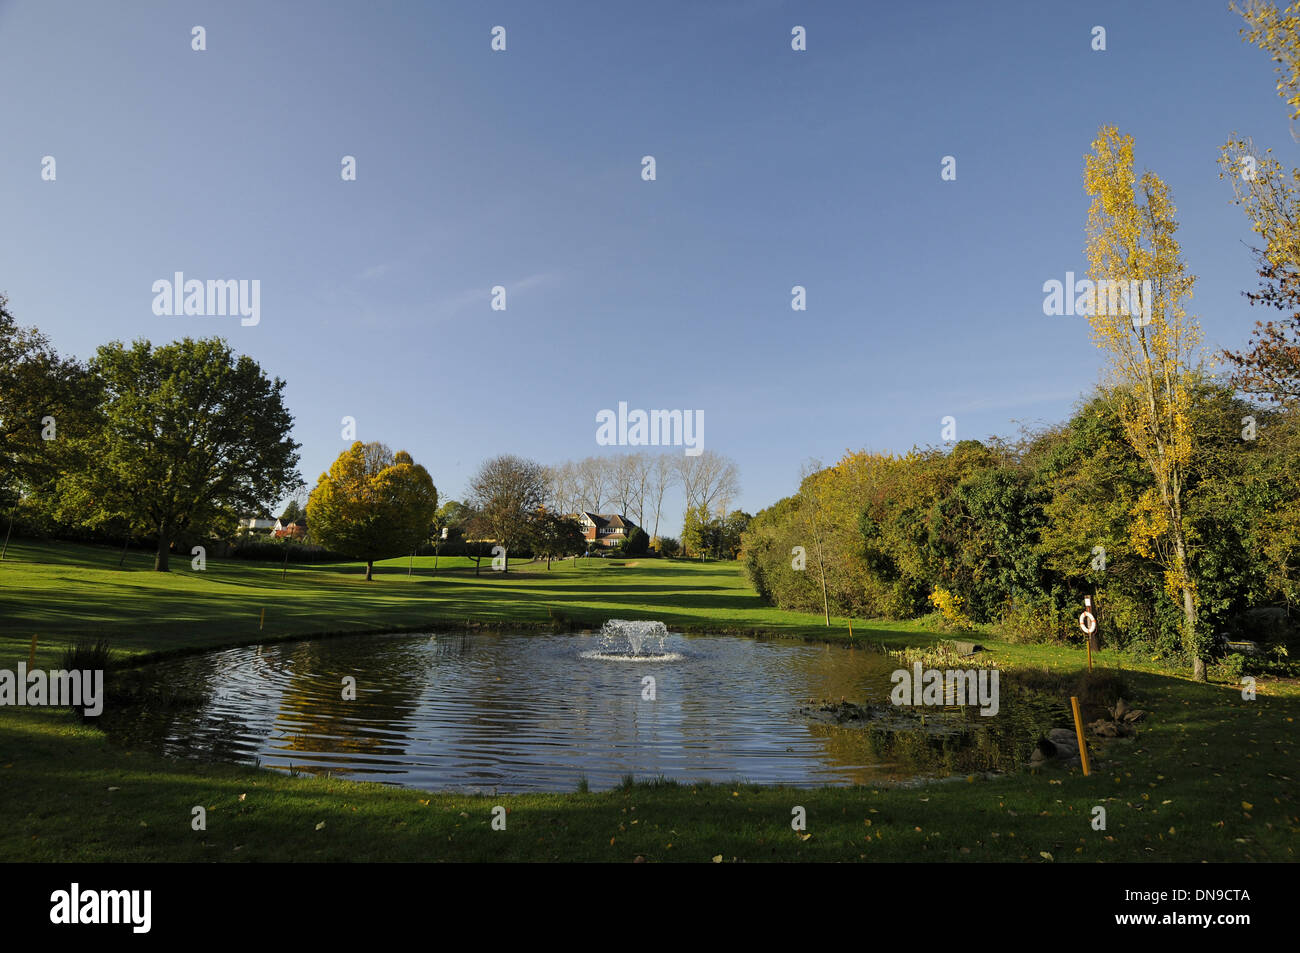 Sundridge Park Golf Club - View from Fairway over Pond with Fountain to 18th Hole and Tee with colourful Autumn Trees Bromley Stock Photo